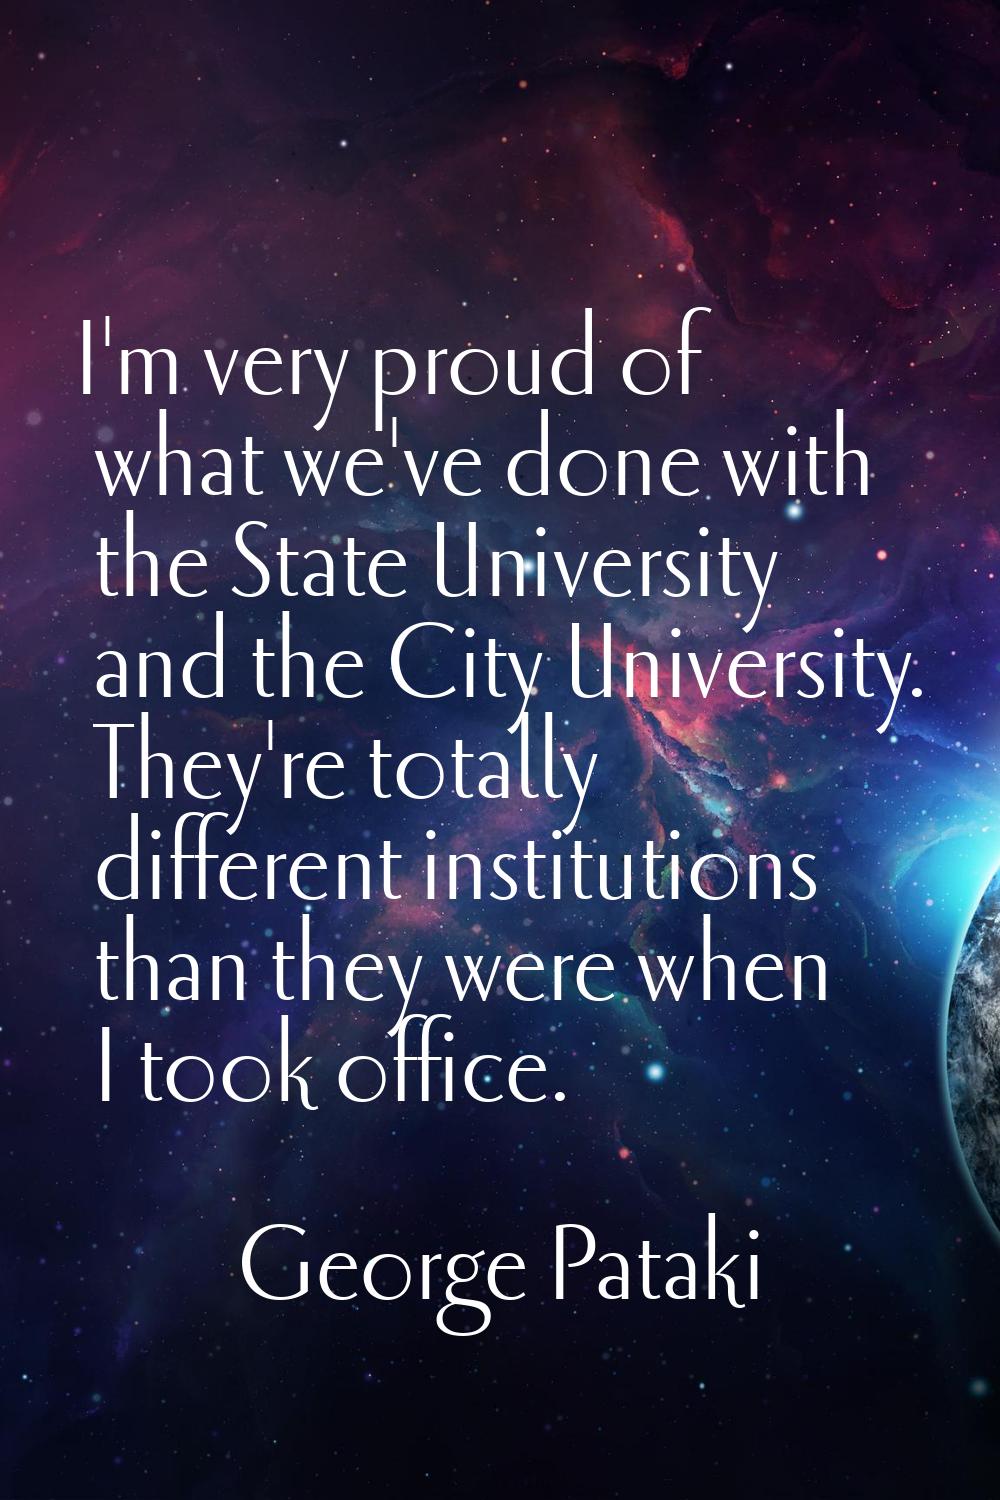 I'm very proud of what we've done with the State University and the City University. They're totall